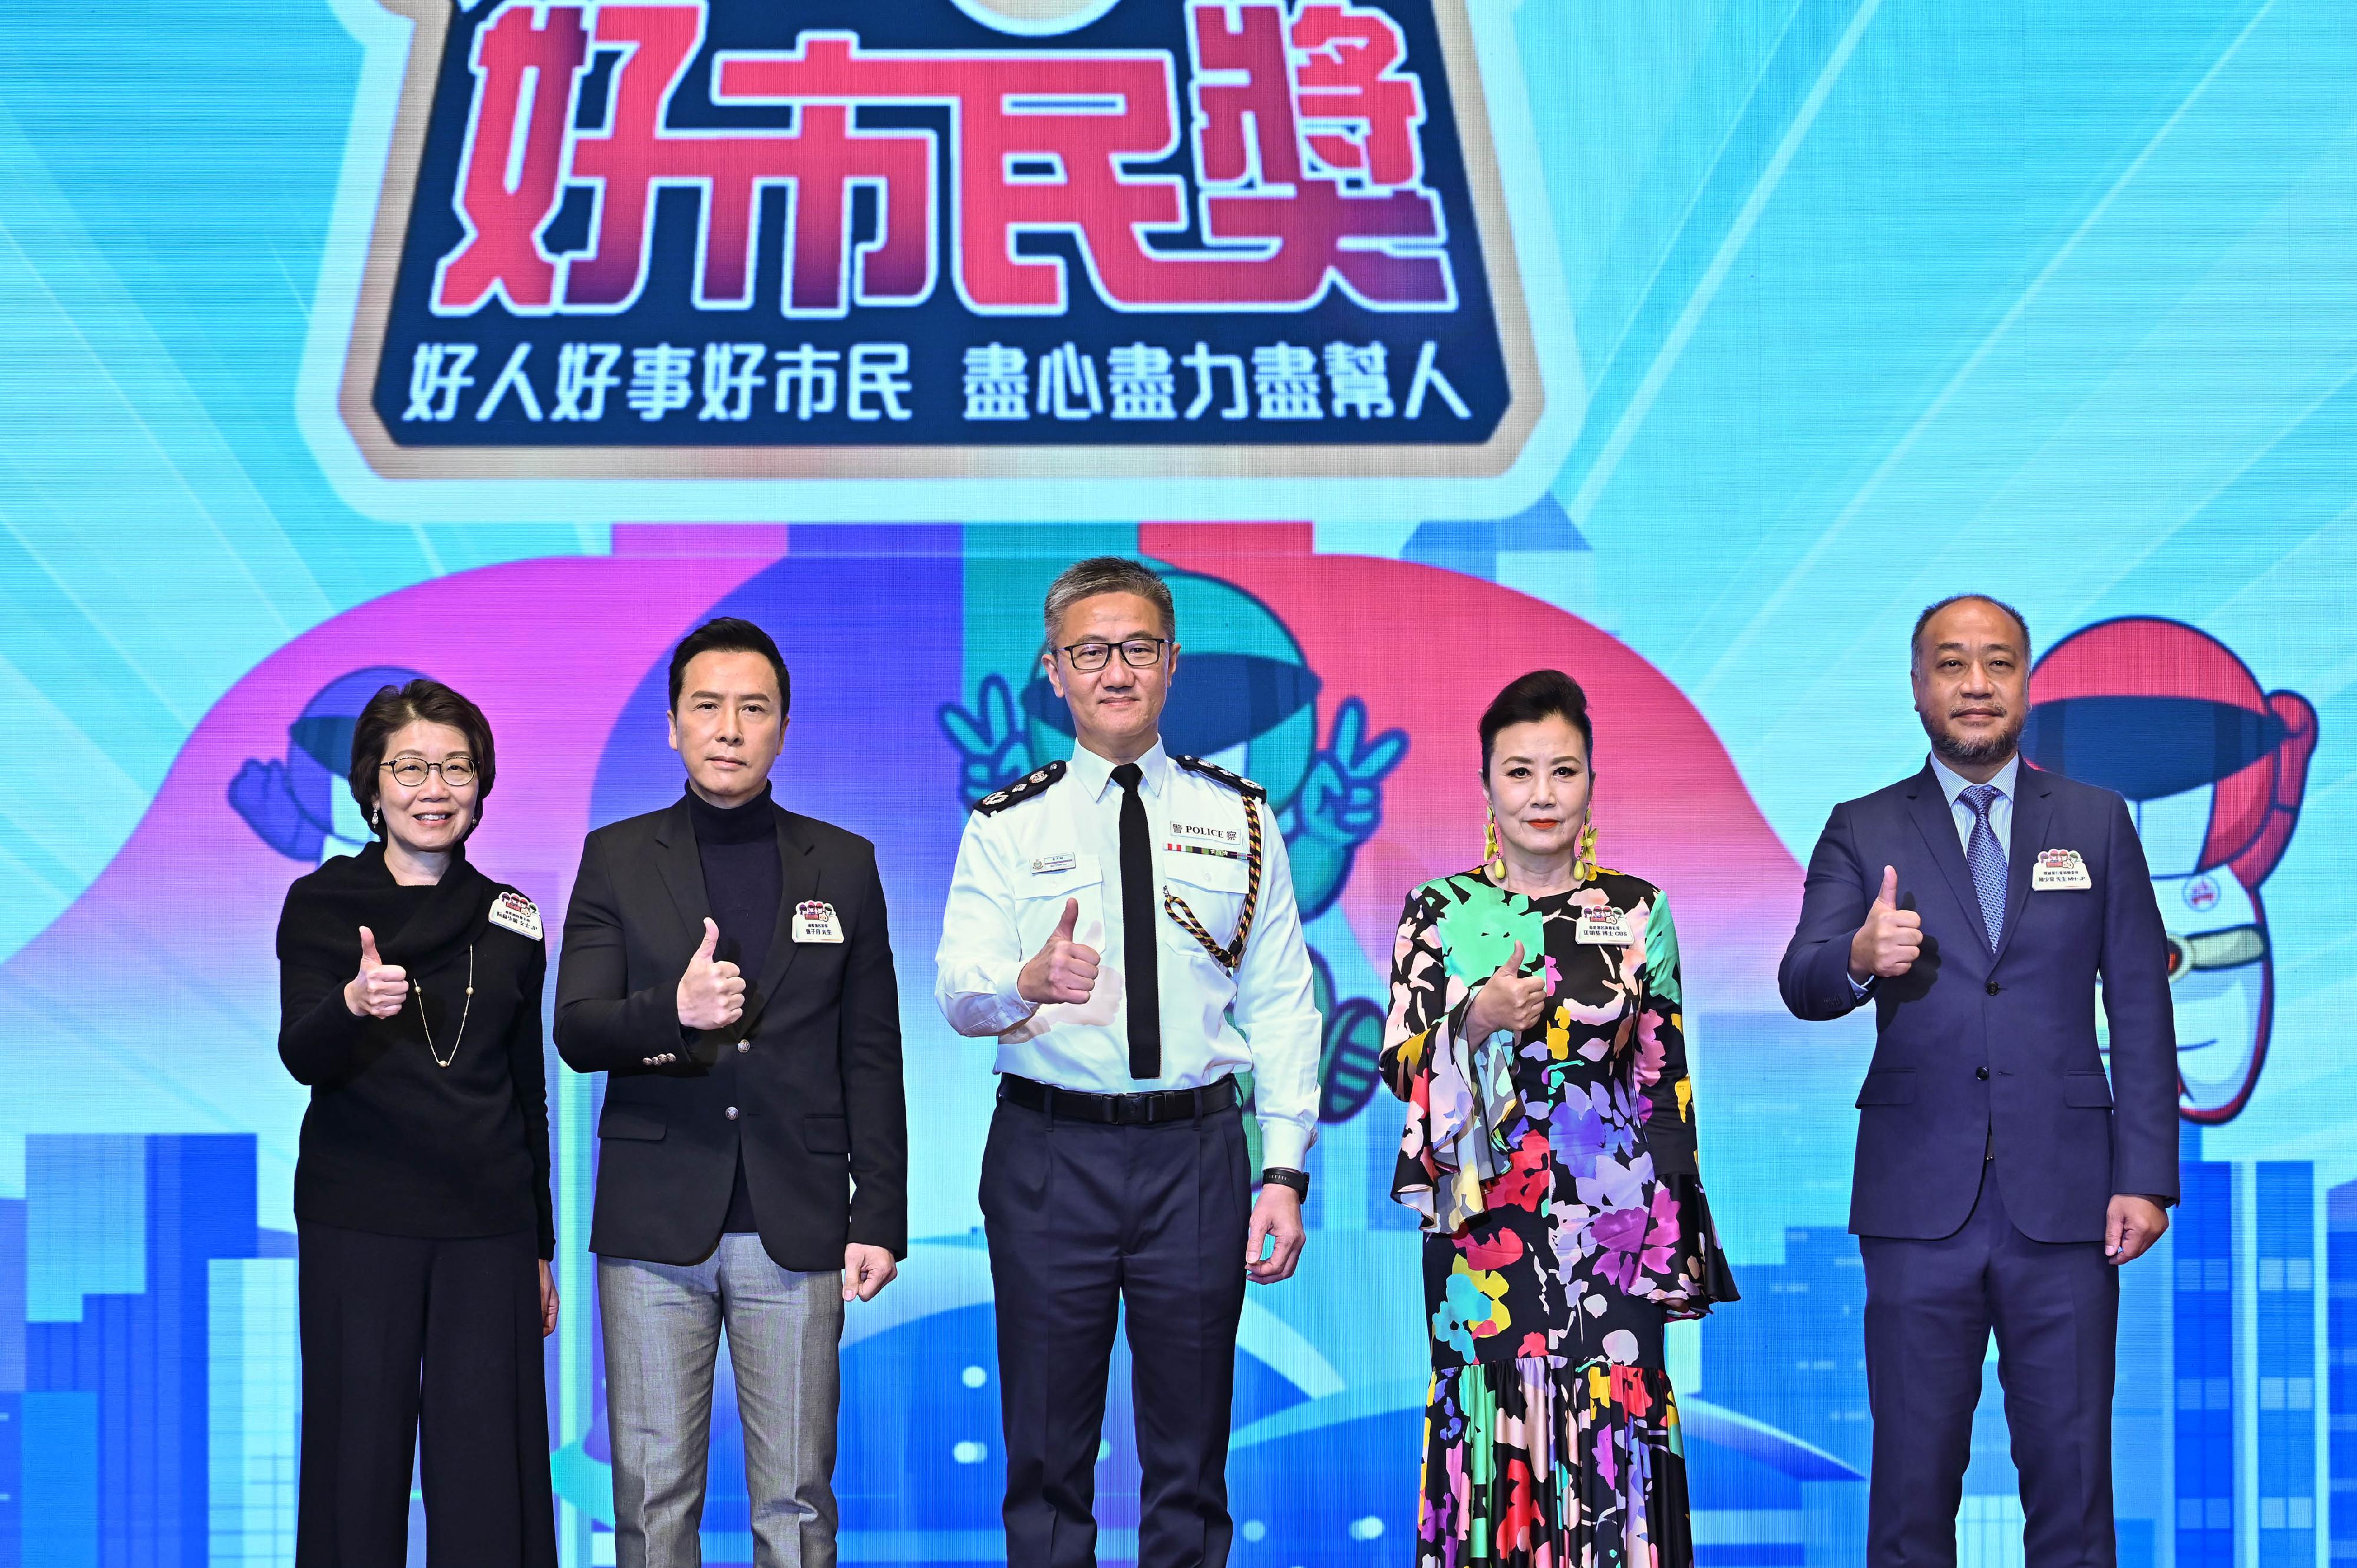 The Good Citizen Award 2022 cum 50th Anniversary Presentation Ceremony was held today (February 26). Photo shows (from left) the Chairman of the Hong Kong General Chamber of Commerce, Mrs Betty Yuen; international movie star Mr Donnie Yen; the Commissioner of Police, Mr Siu Chak-yee; renowned artiste Dr Elizabeth Wang Ming-chun and member of the Fight Crime Committee, Mr Chan Siu-tong, officiating at the ceremony.